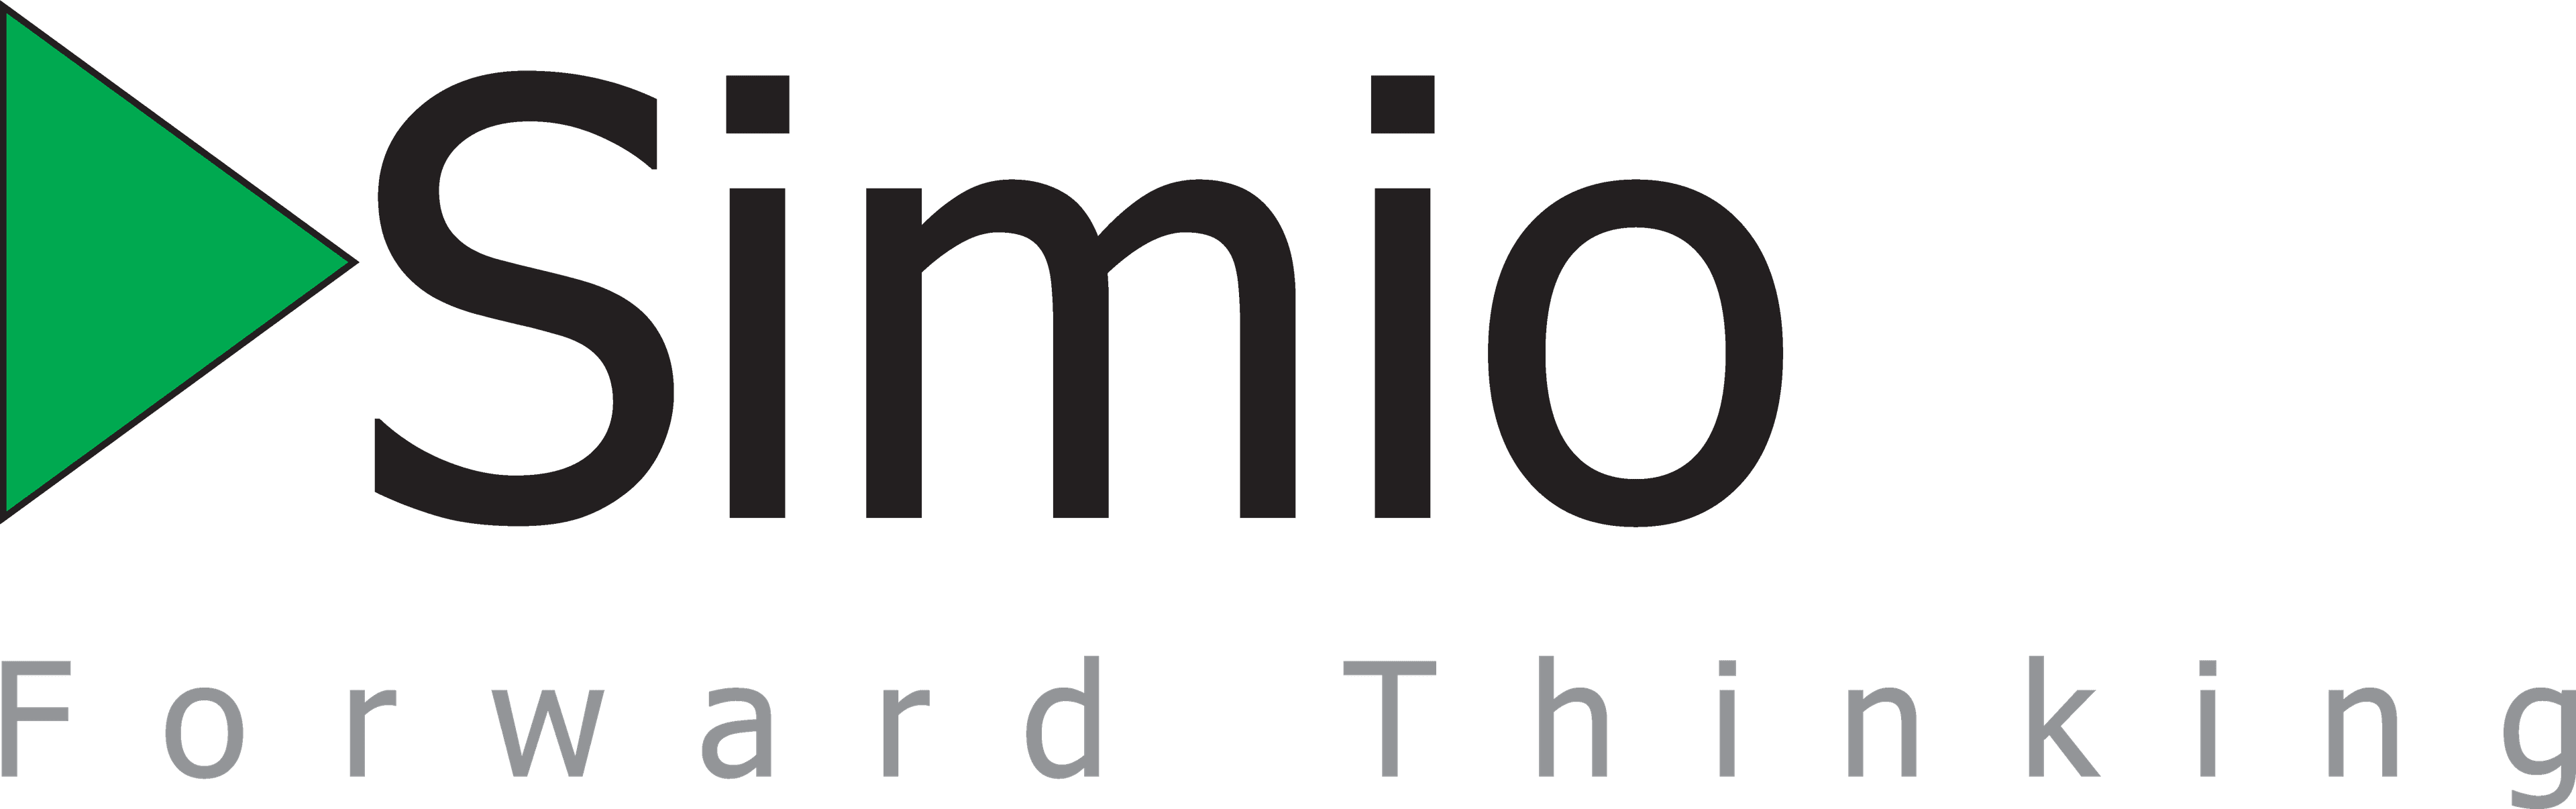 Download Simio Software